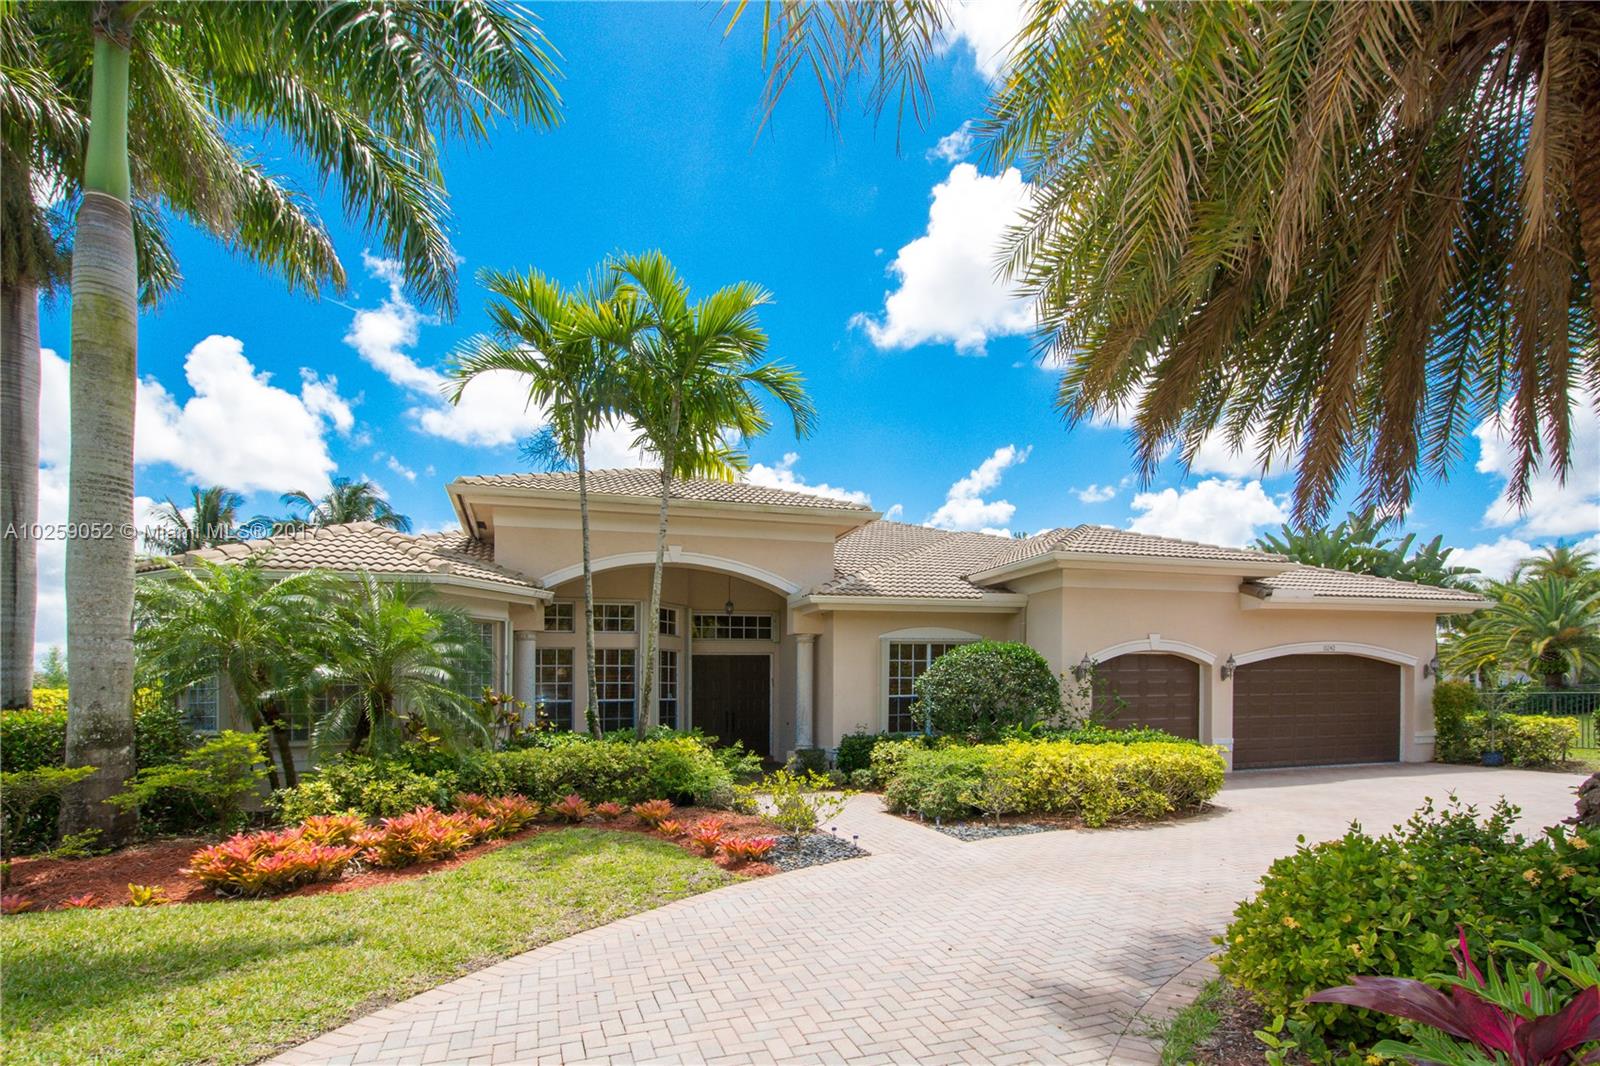 Luxury Davie Florida Long Lake Ranches Home For Sale